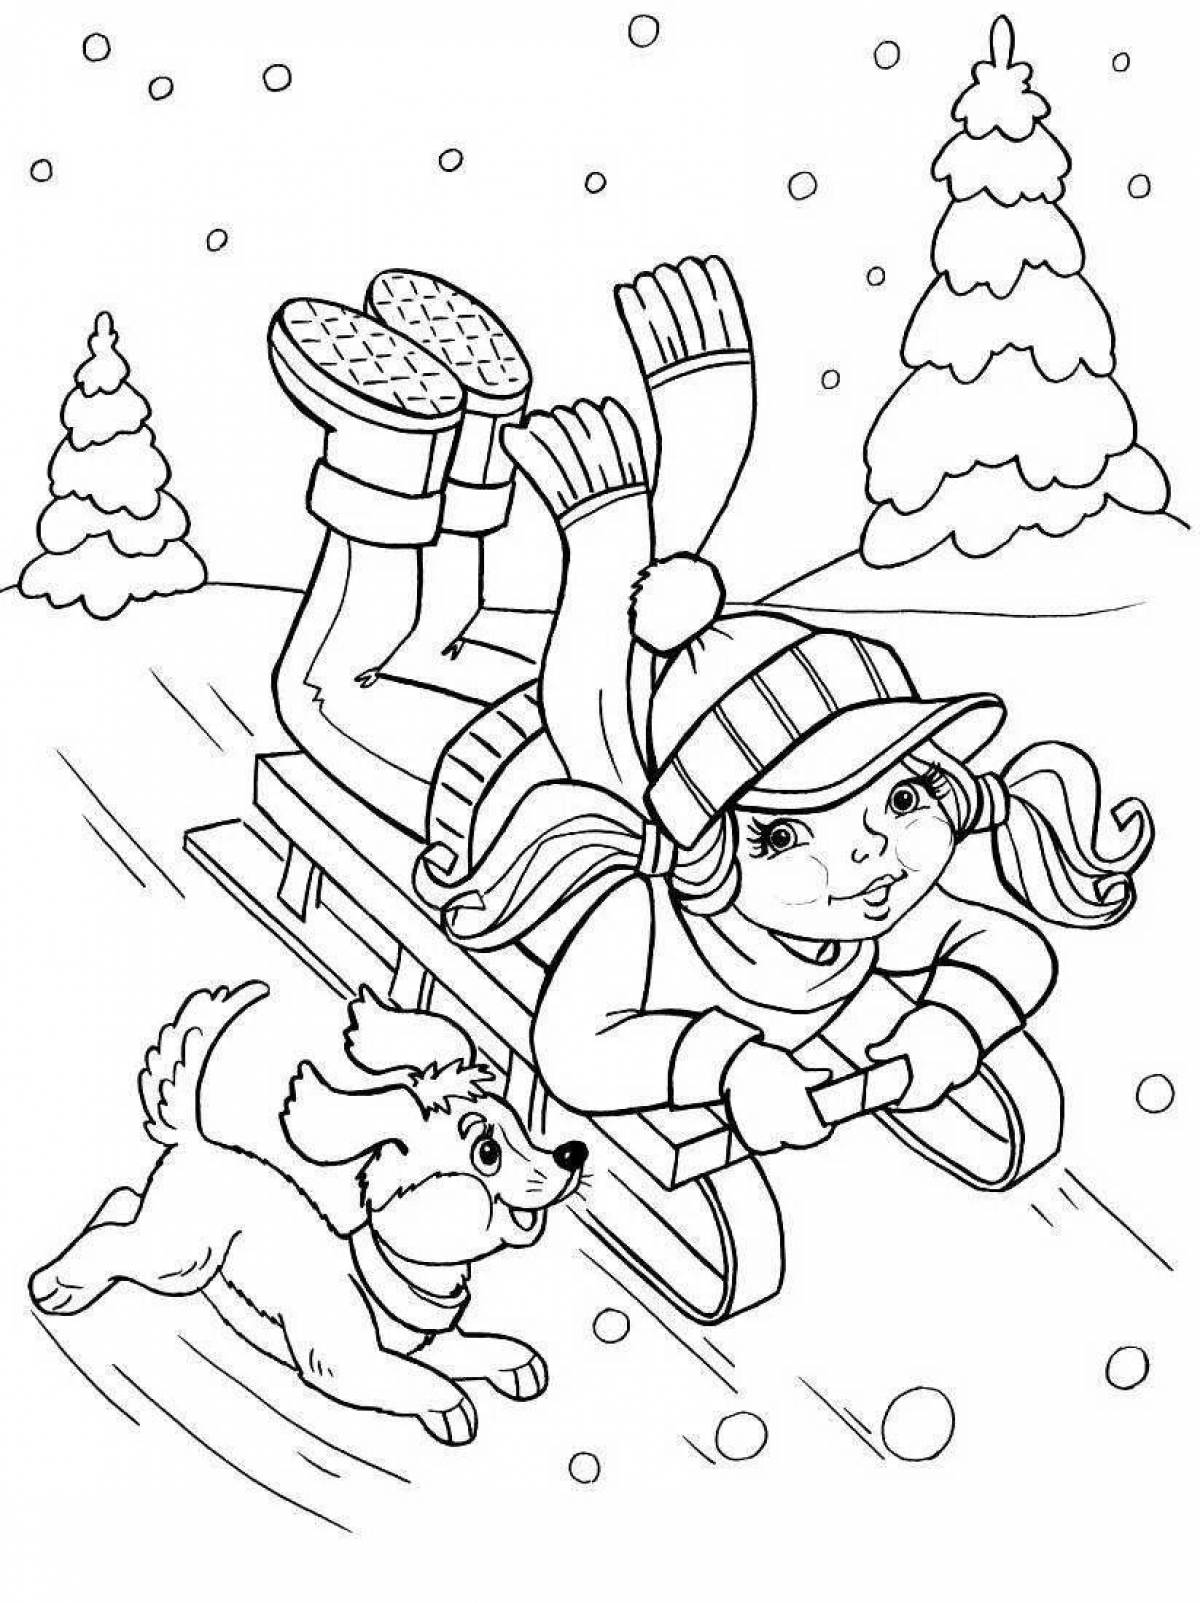 Exquisite winter coloring book for girls